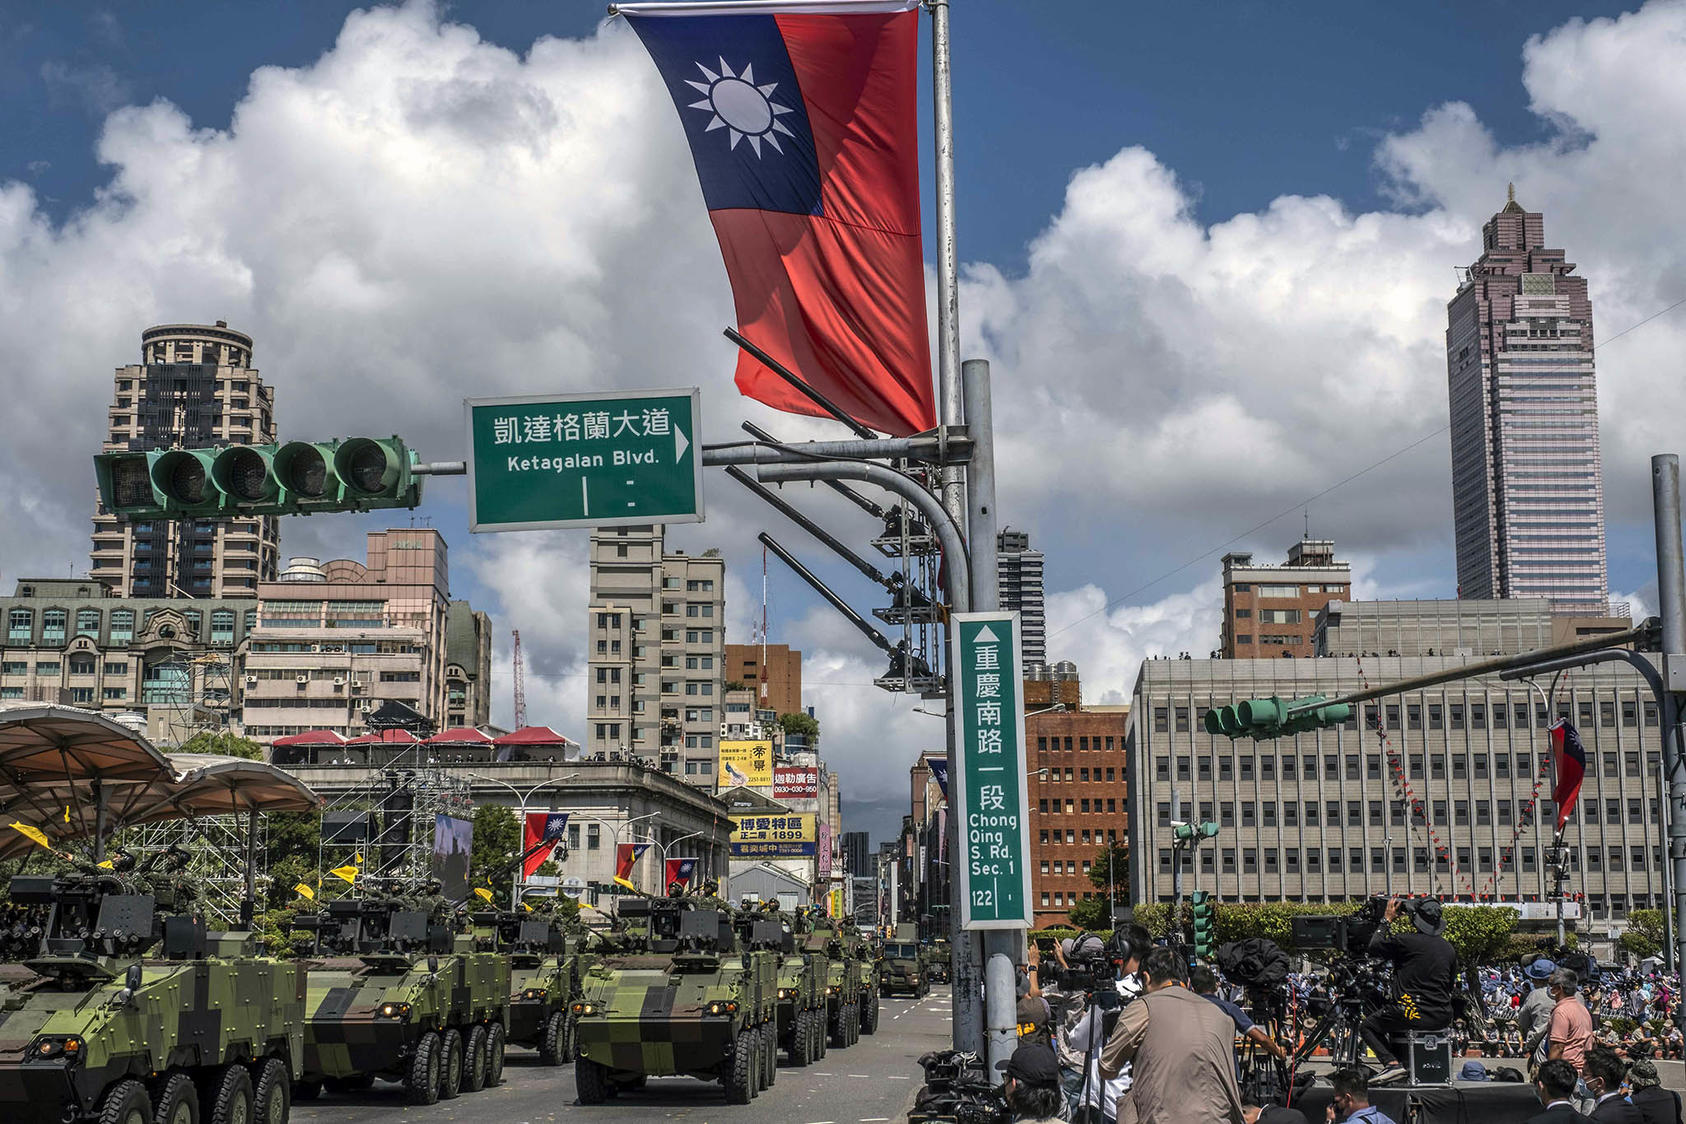 Military vehicles in a parade in Taipei, Taiwan, on Oct. 10, 2021. (Lam Yik Fei/The New York Times)